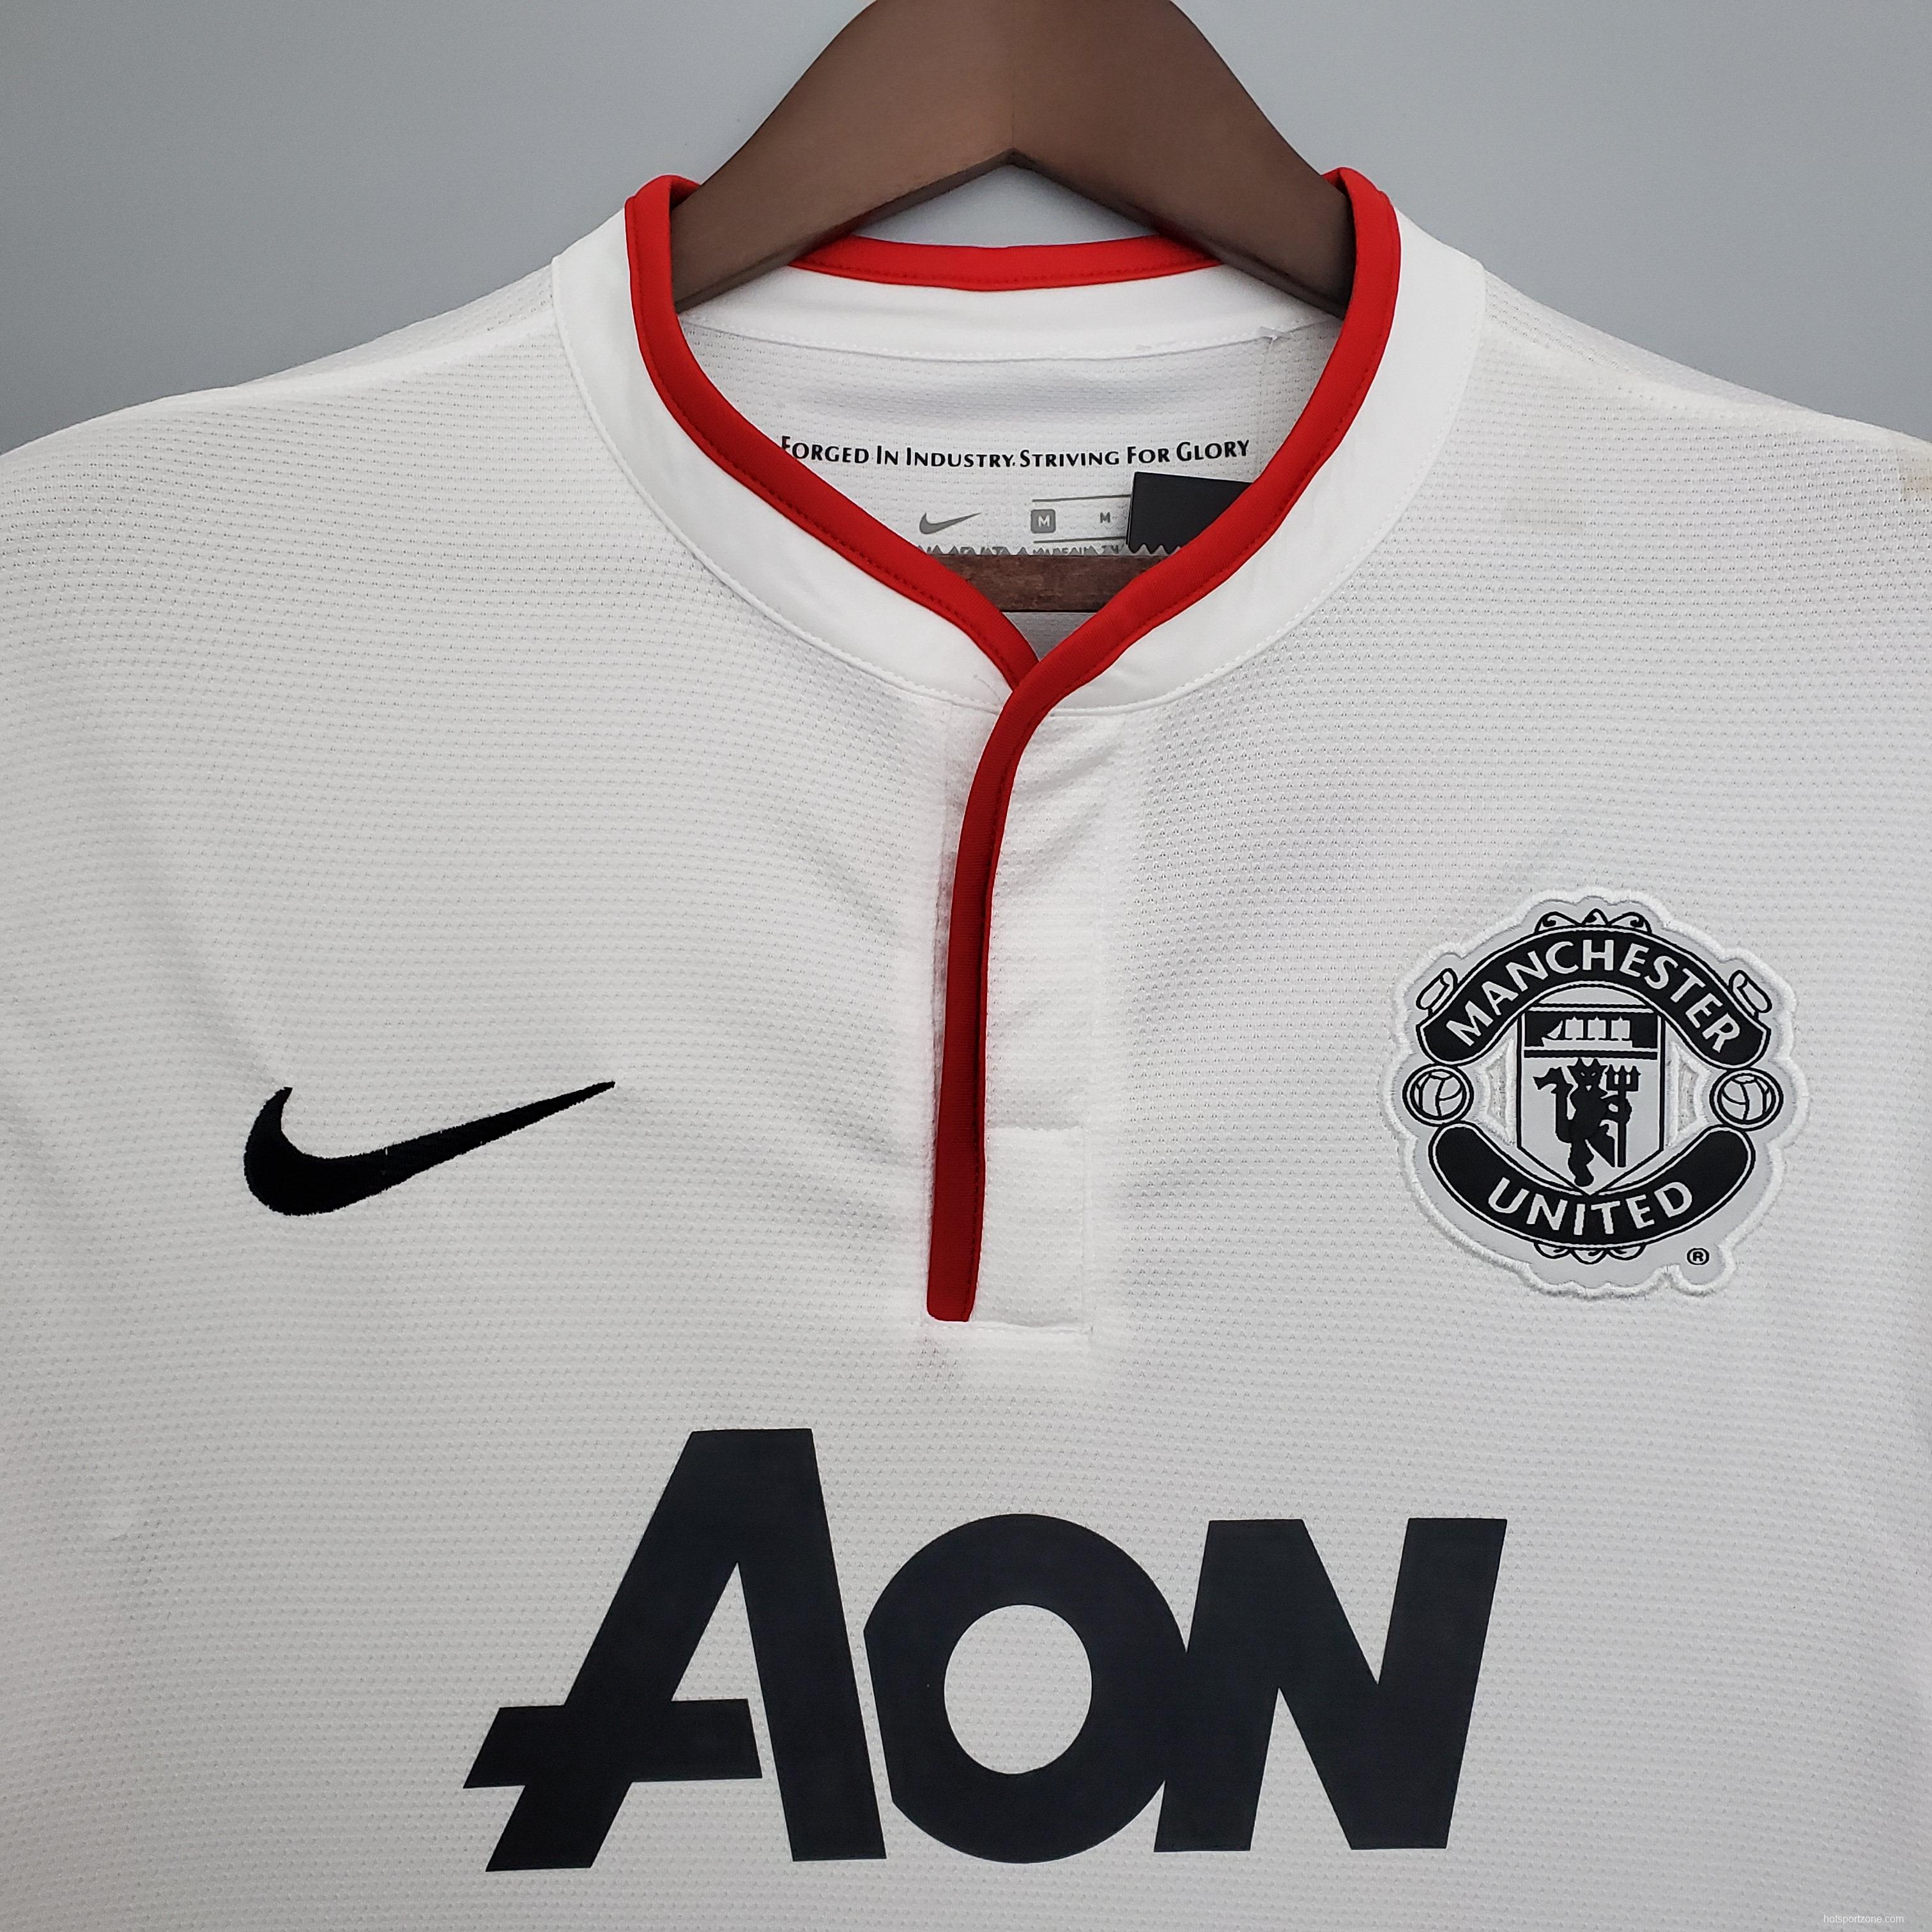 Retro 13/14 Manchester United away Soccer Jersey